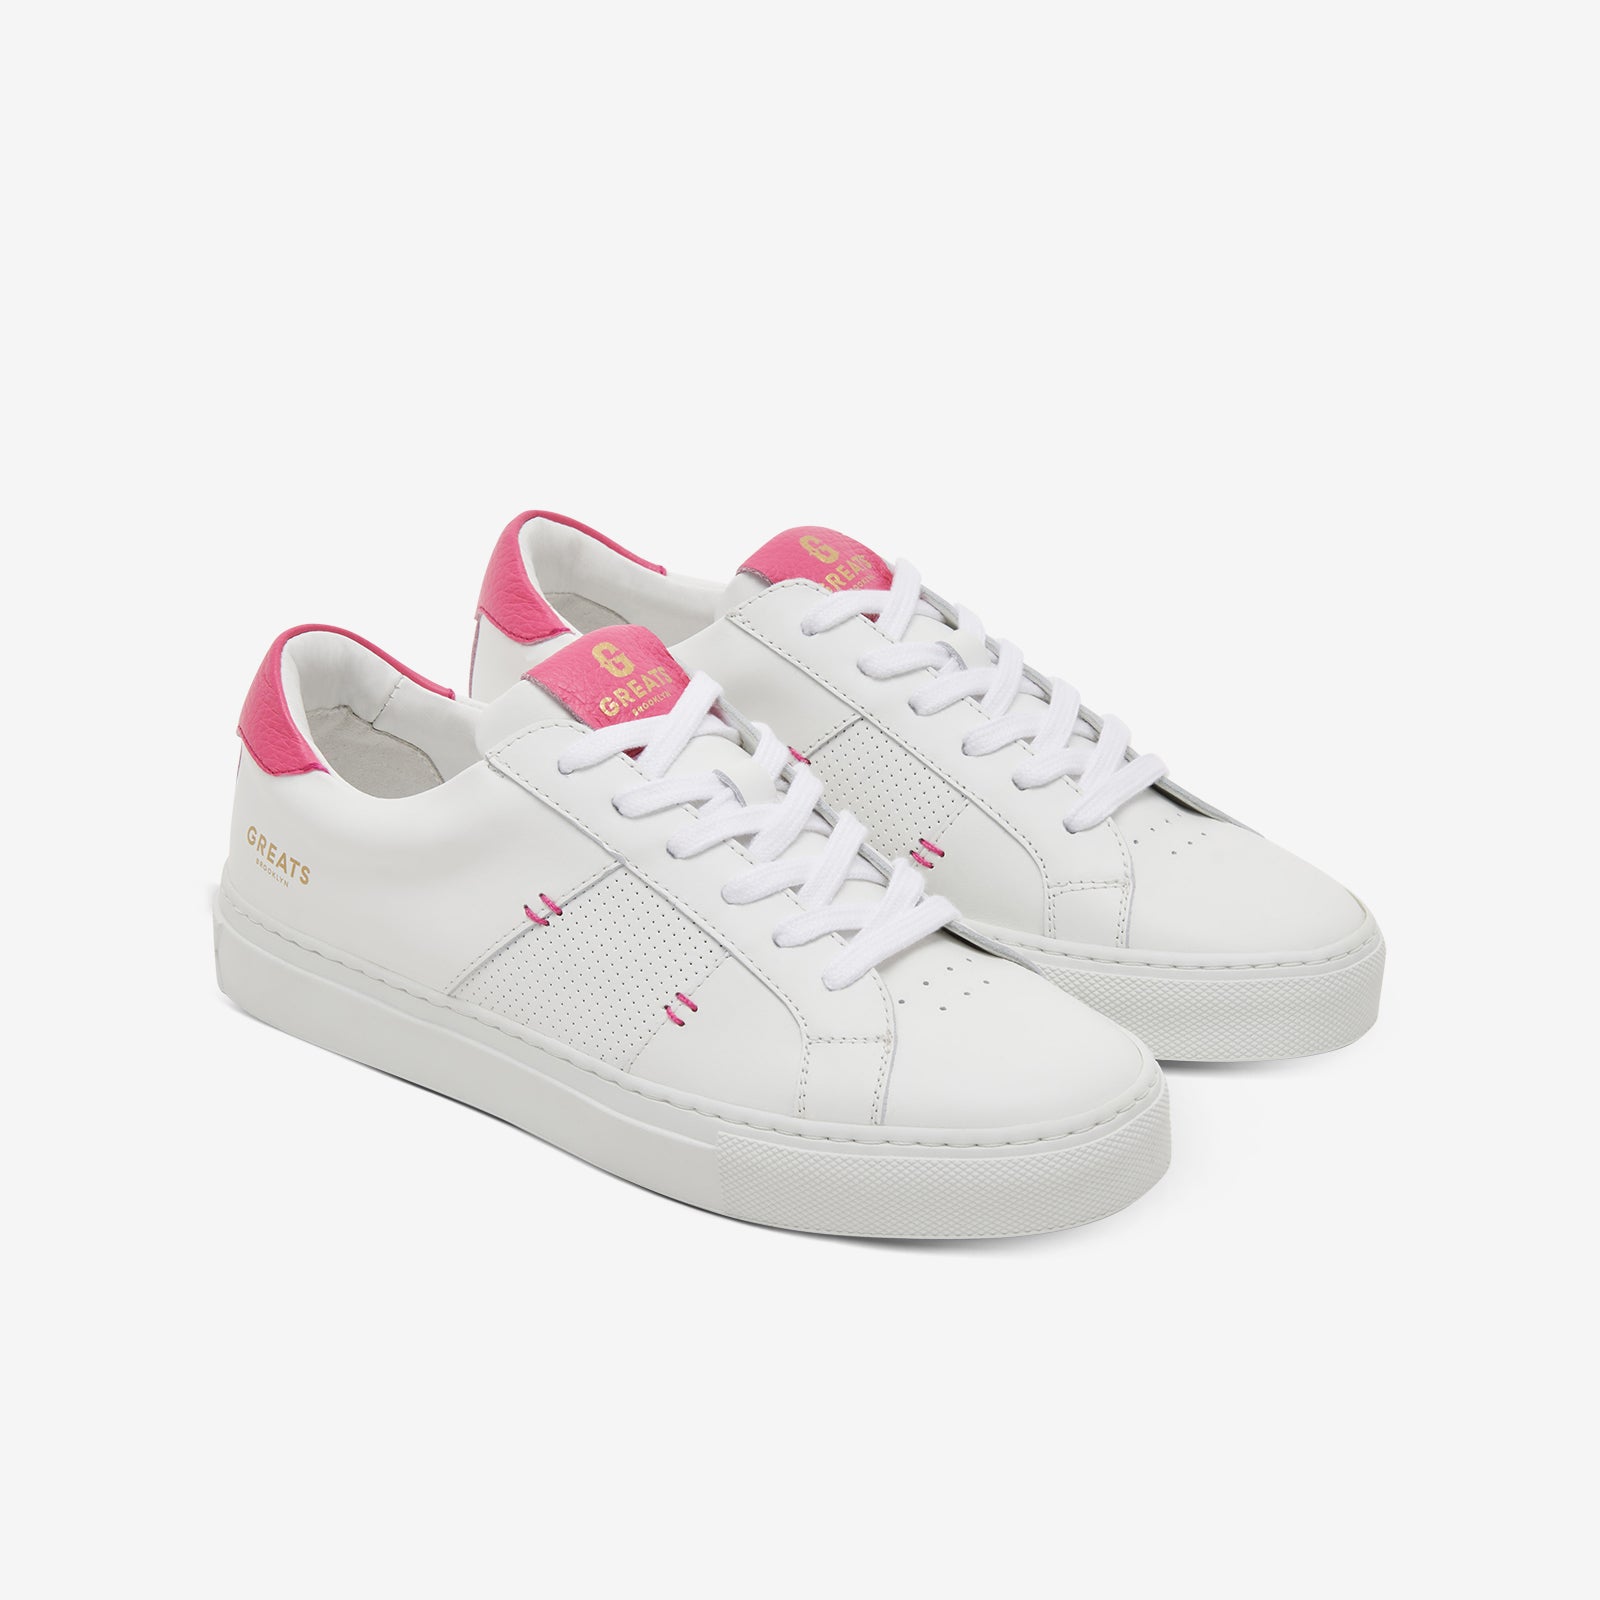 The Royale 2.0 - White/Neon Pink